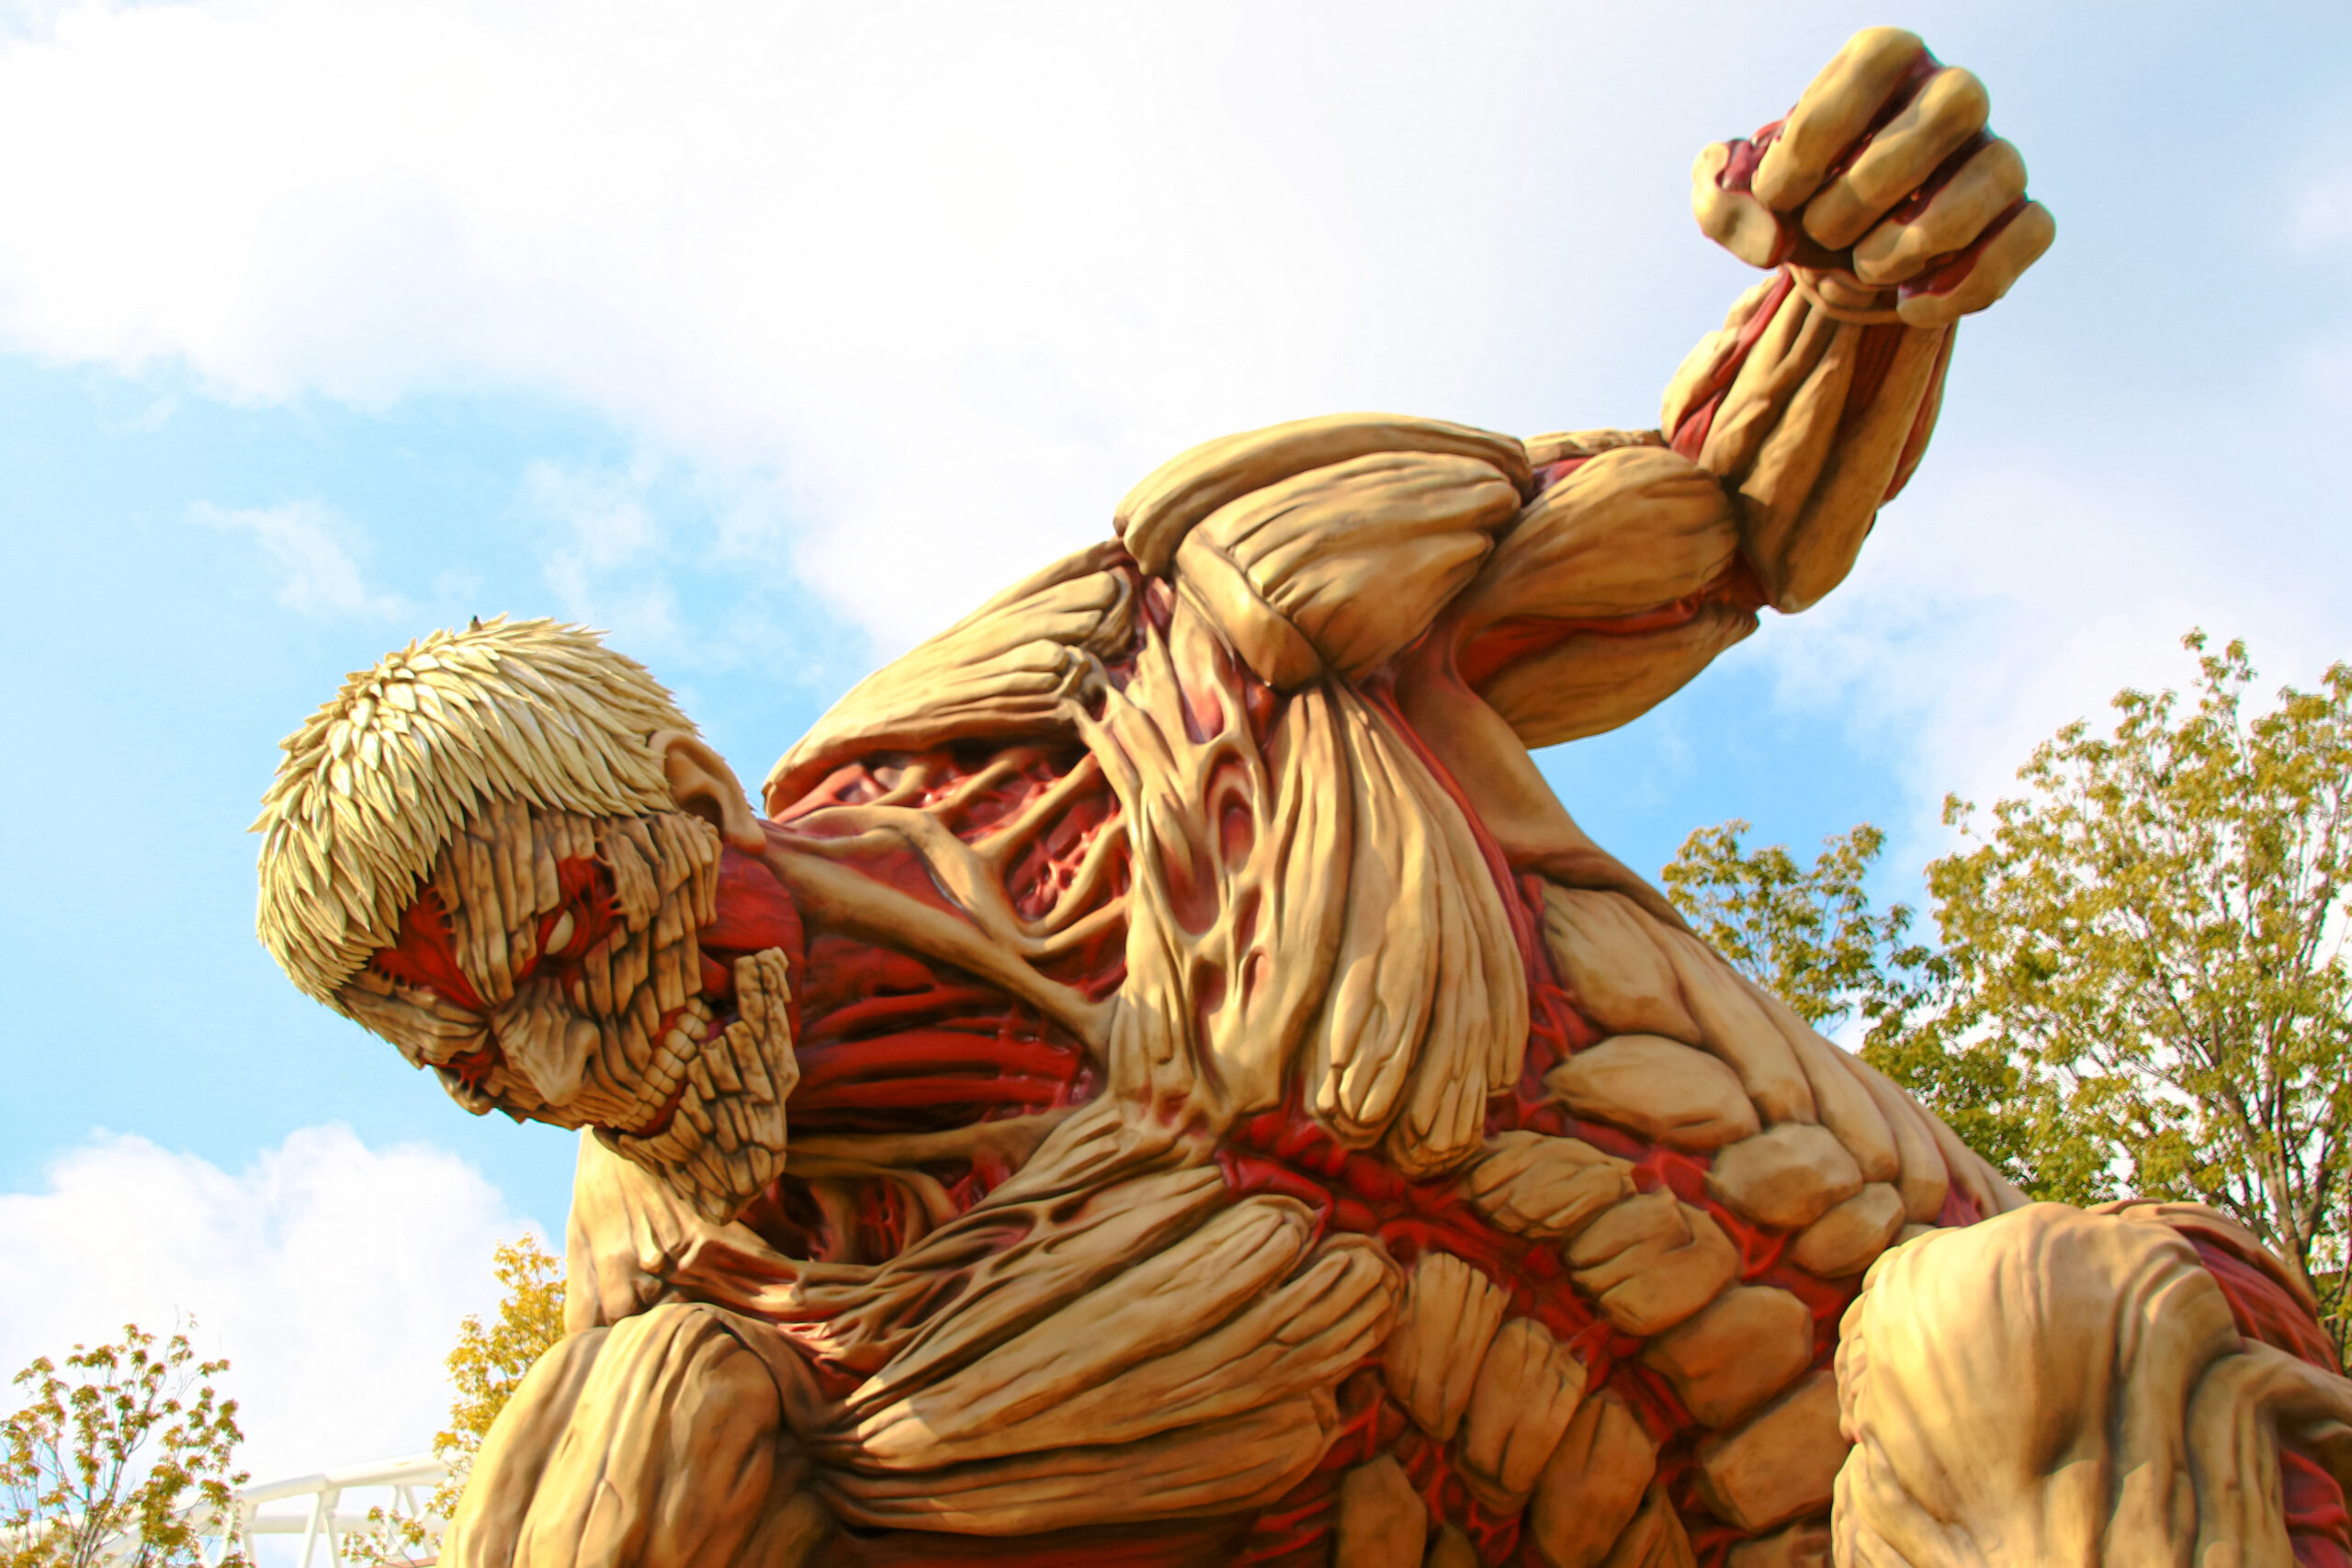 Attack on Titan: The Final Season Part 3' to be split into two parts